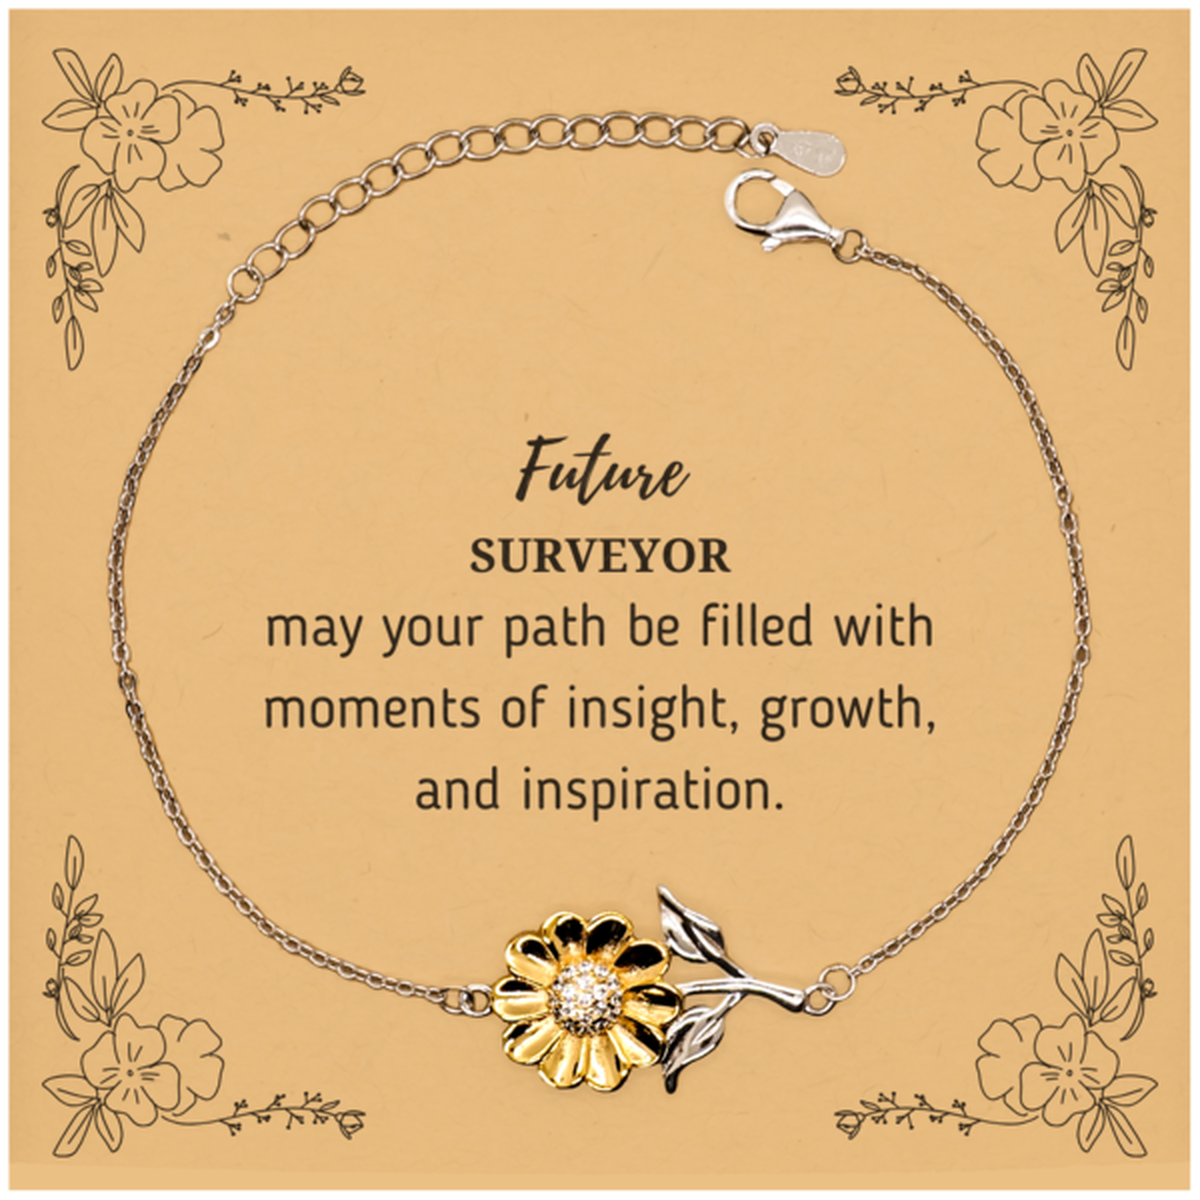 Future Surveyor Gifts, May your path be filled with moments of insight, Graduation Gifts for New Surveyor, Christmas Unique Sunflower Bracelet For Men, Women, Friends